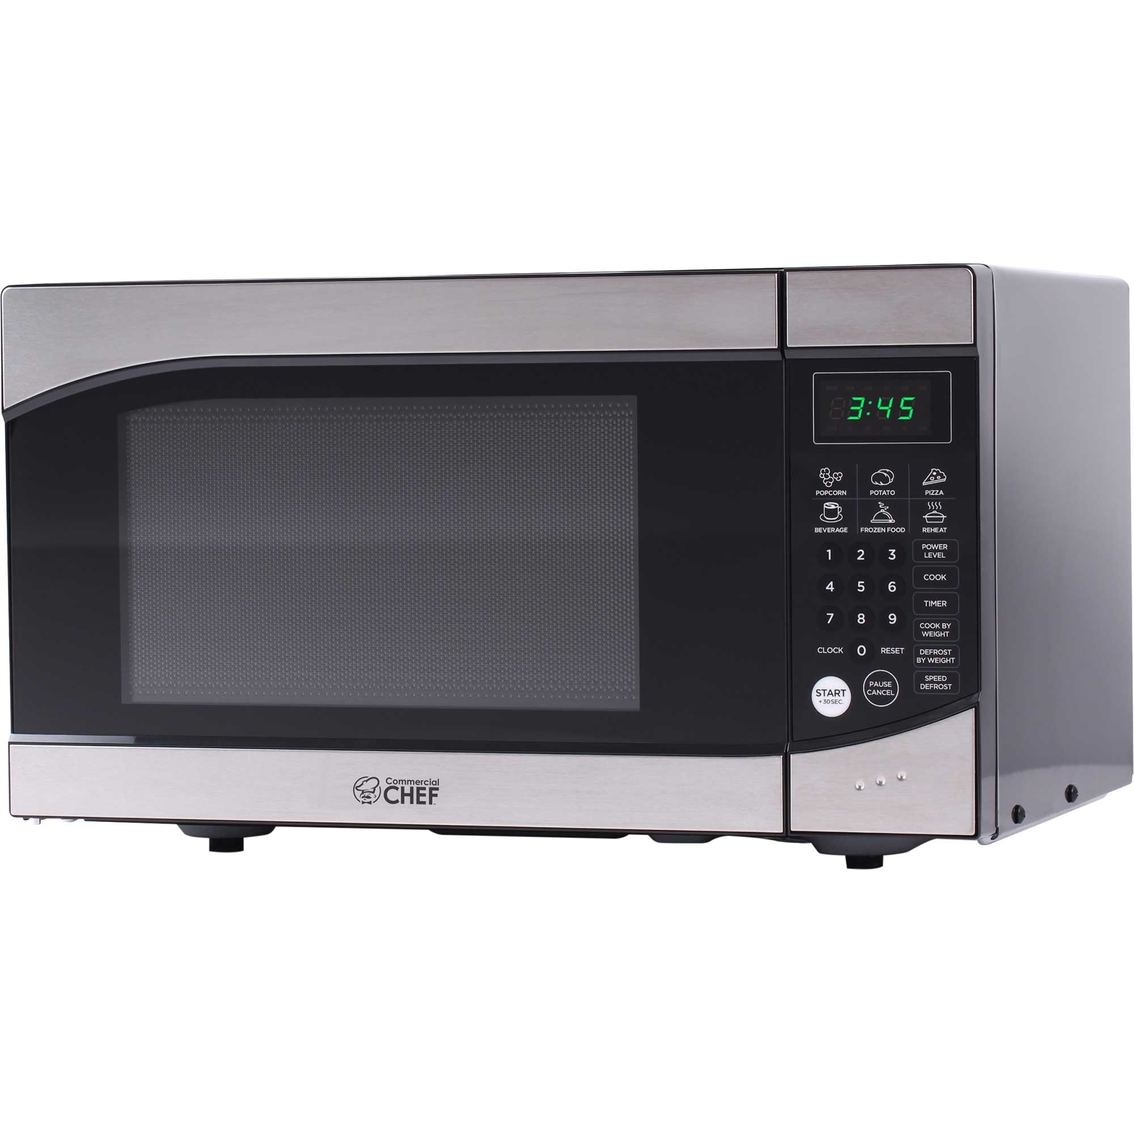 Commercial Chef .9 cu. ft. Counter Top Microwave - Image 1 of 8